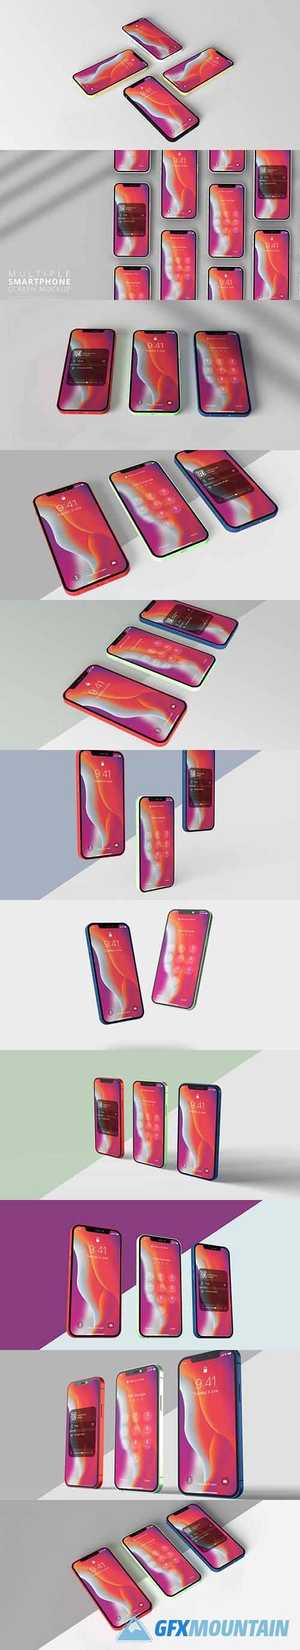 Mockup with multiple different phone